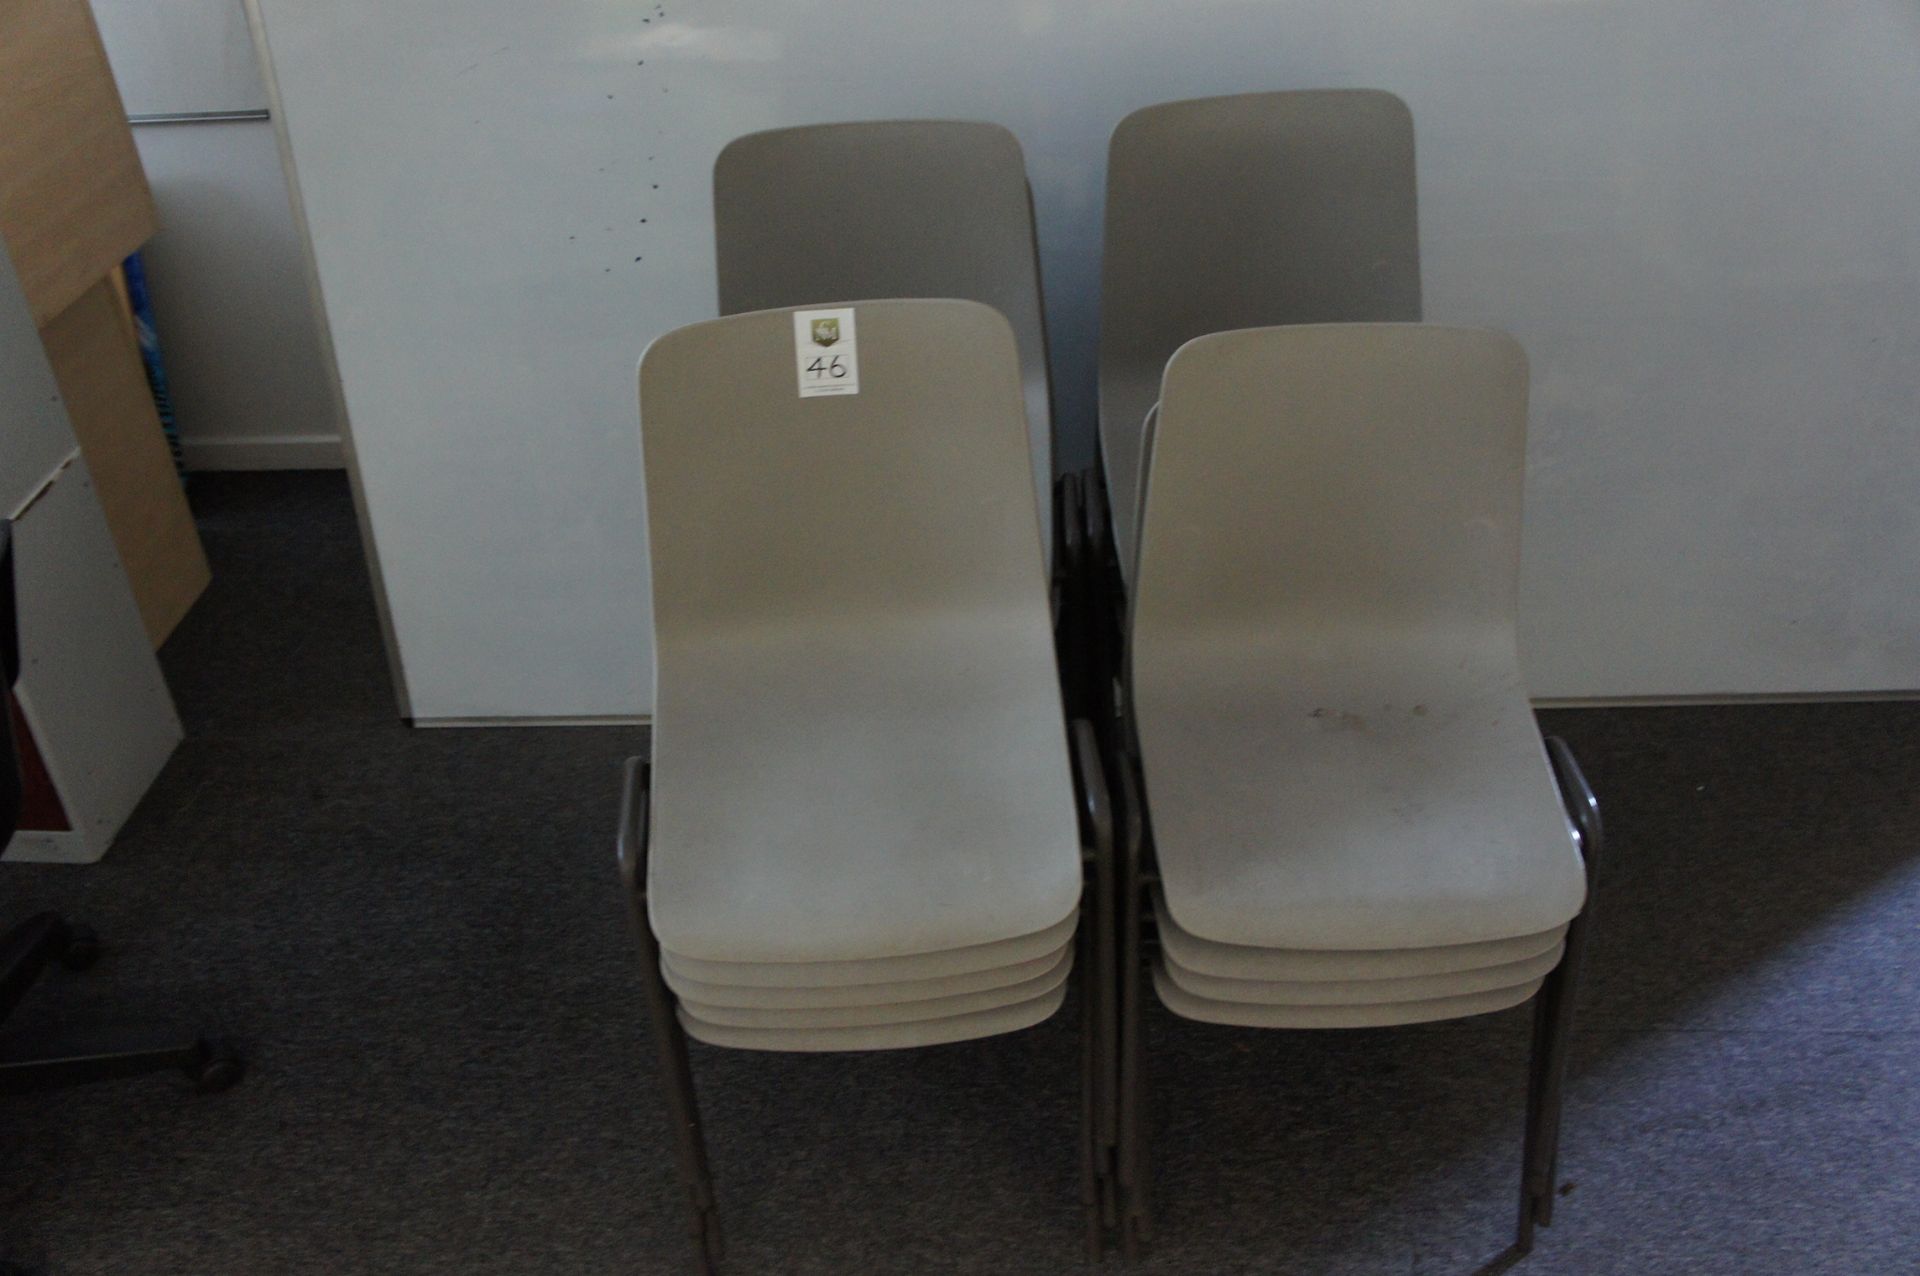 Remploy poly chairs (19)